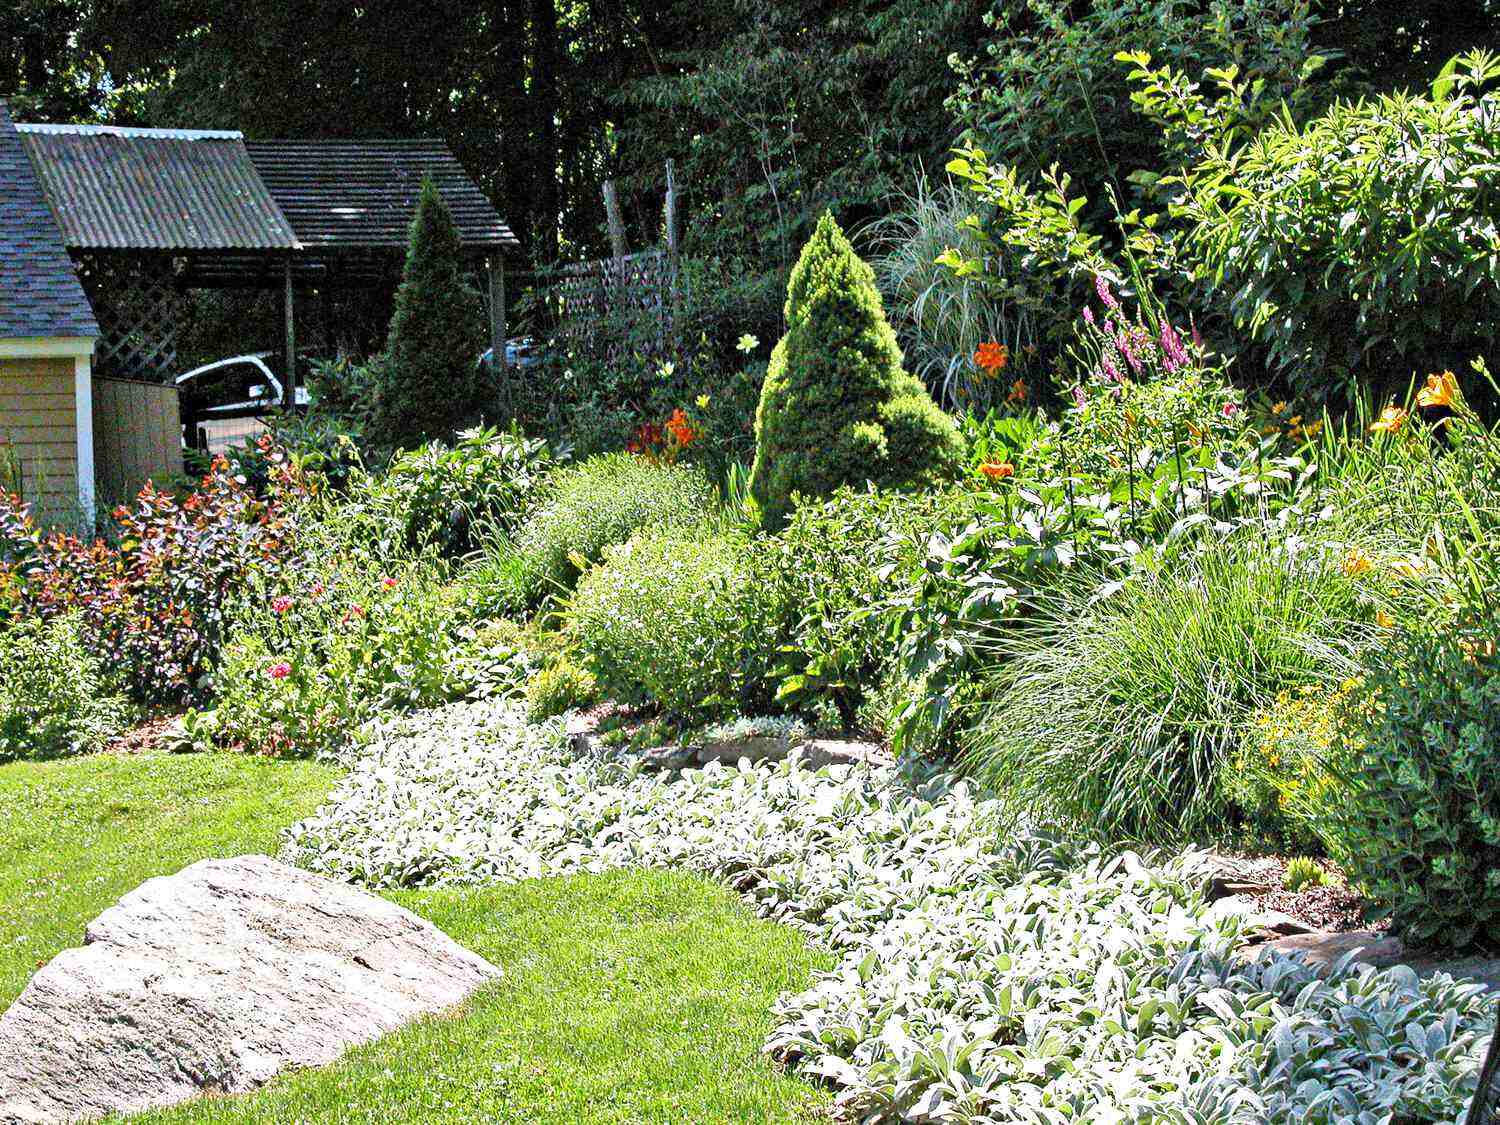 How To Clean A Yard That Is Overgrown With Weeds, Rocks, Ground Cover